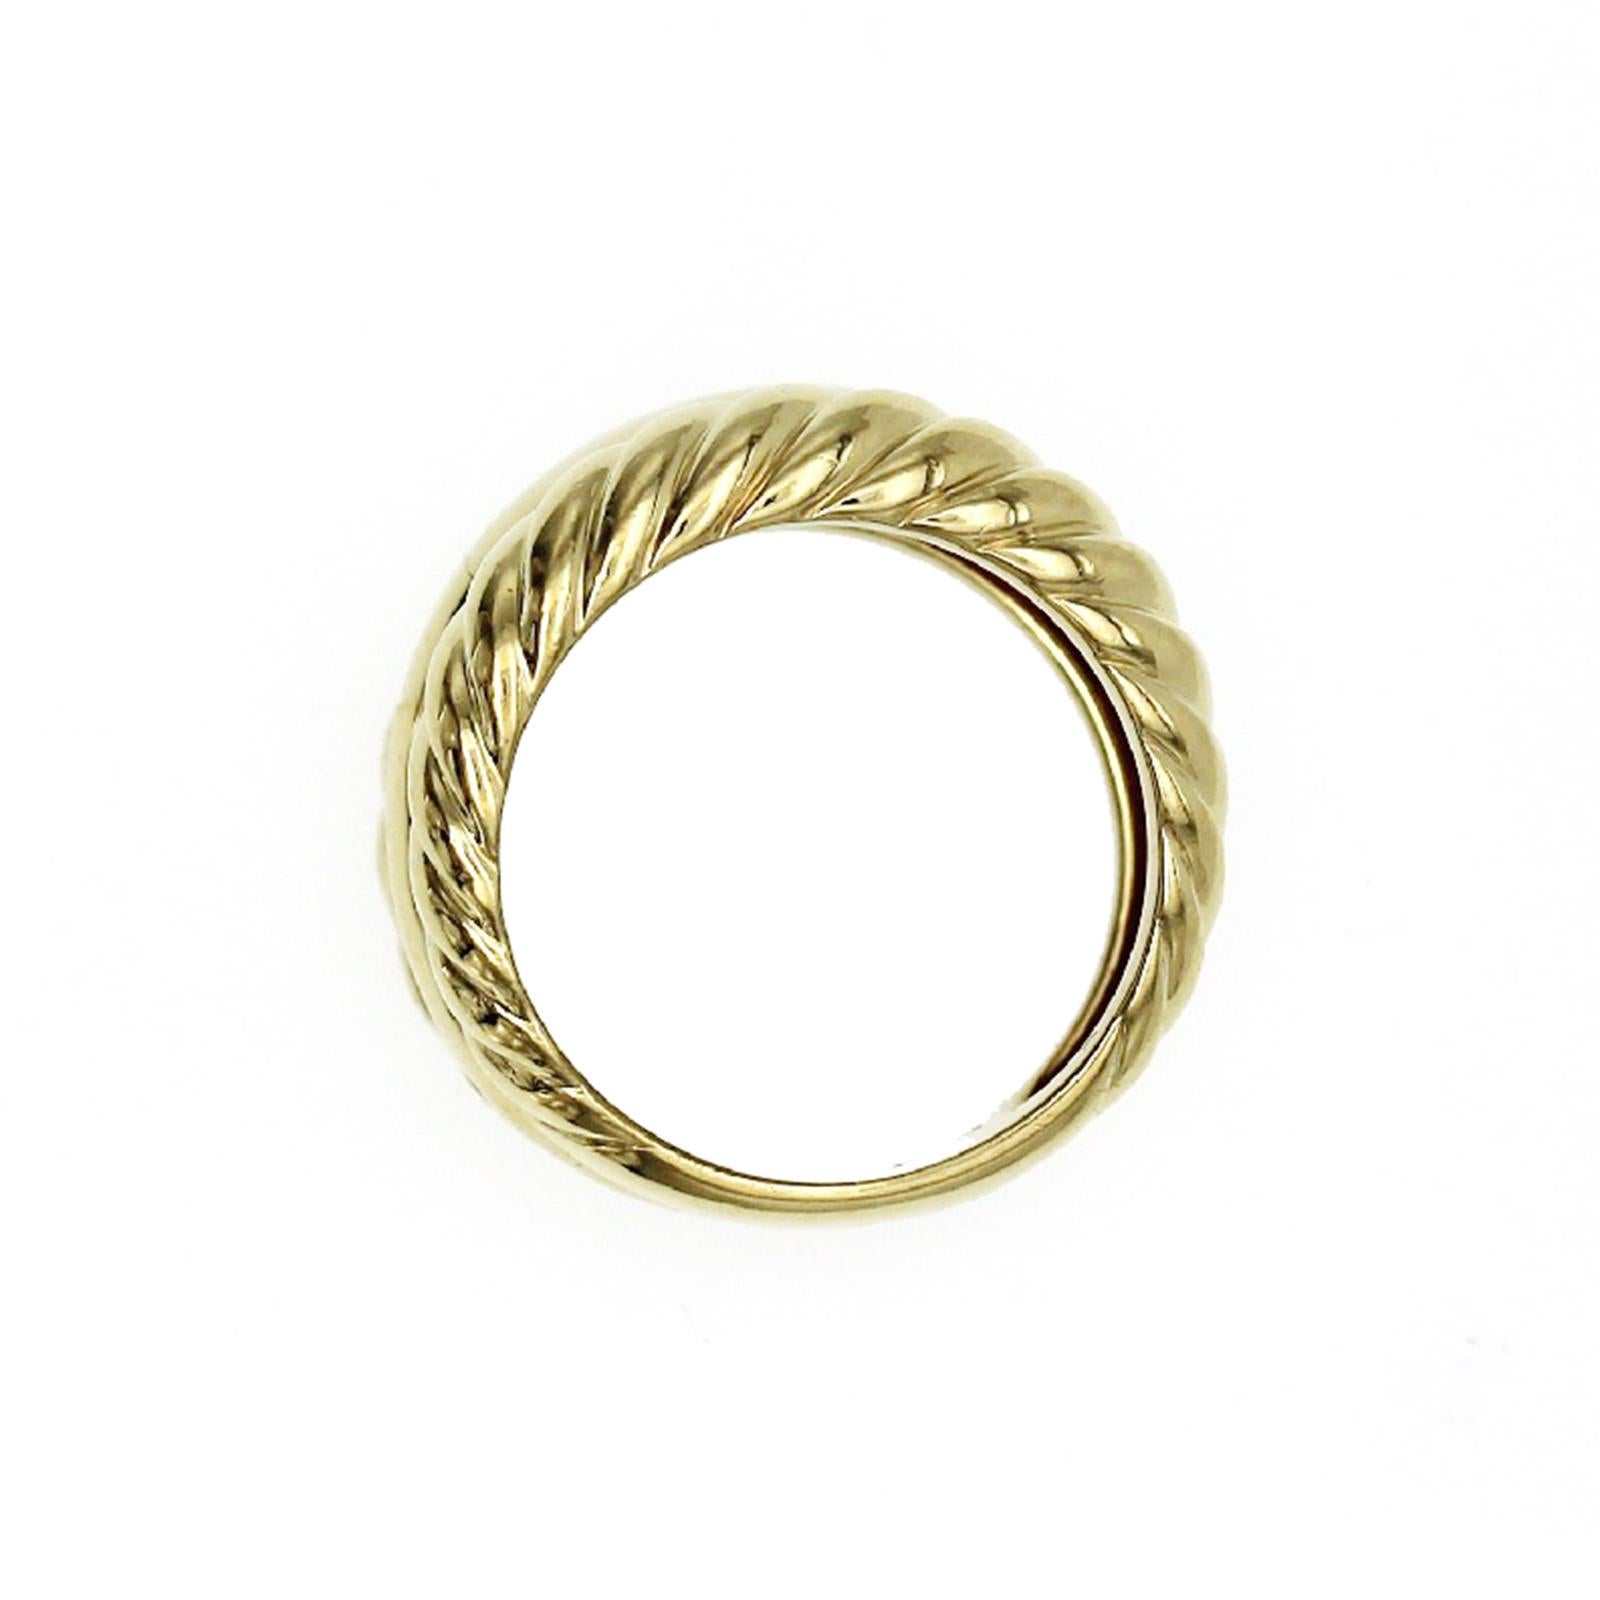 Auth David Yurman 18k Yellow Gold Cable Band Ring Size 6 2